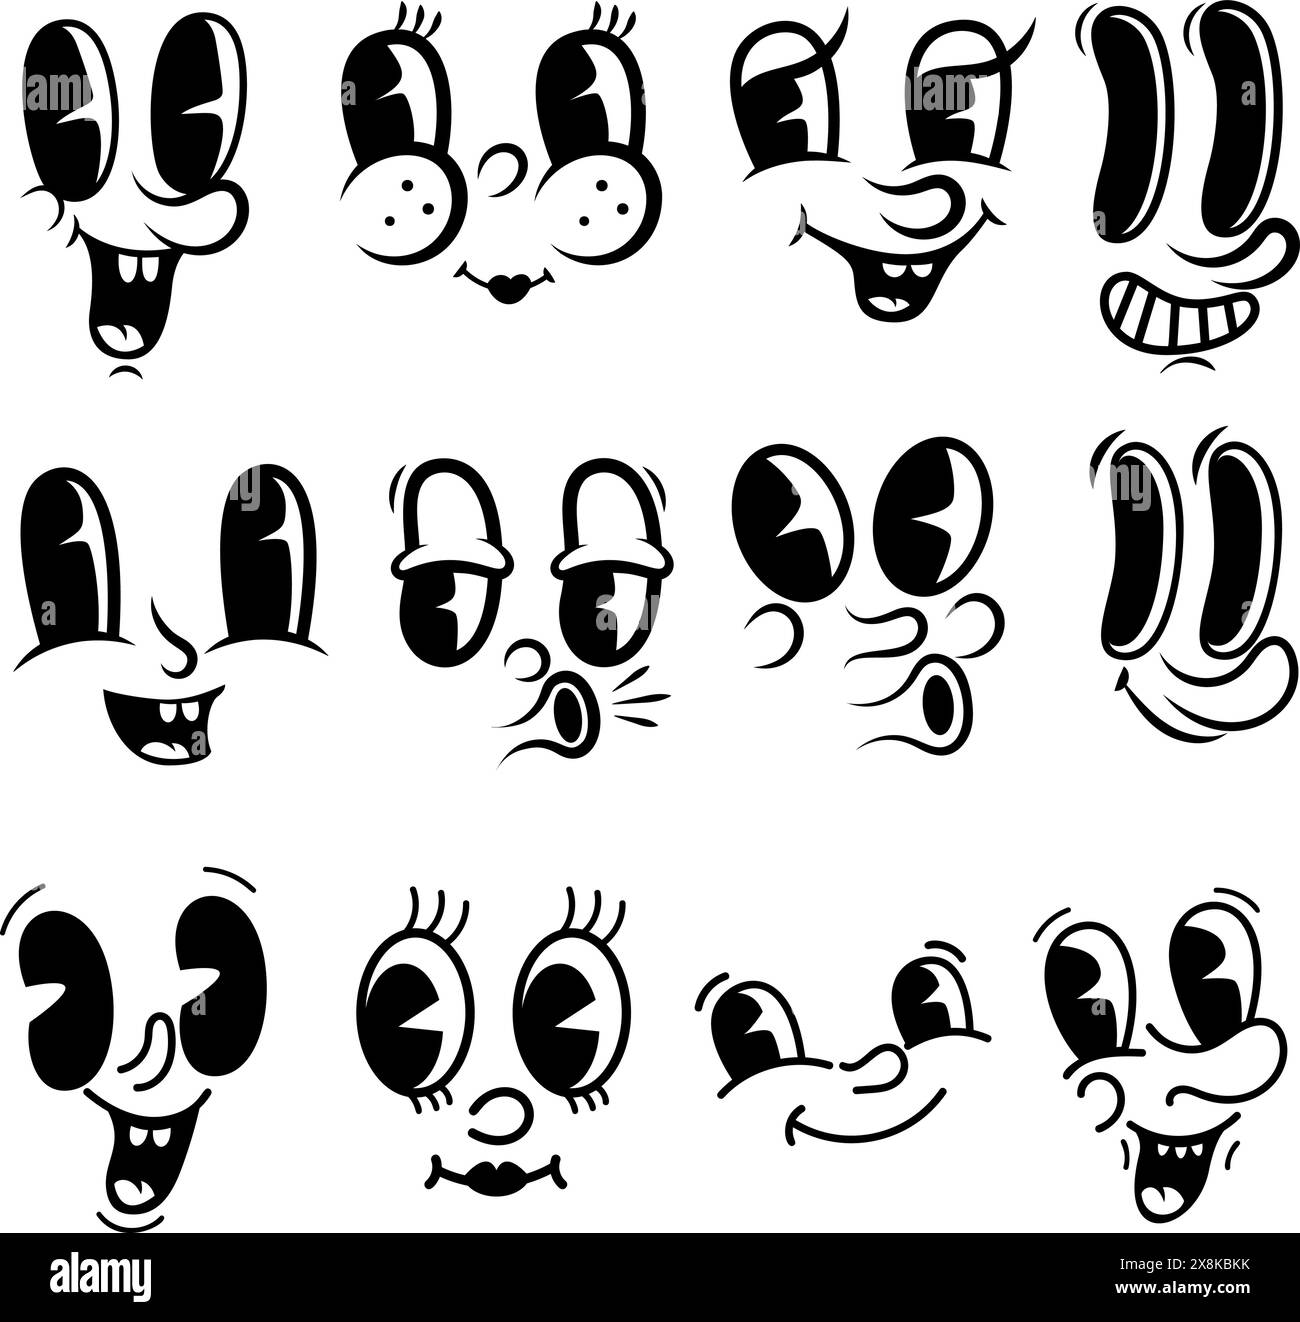 Set of cartoon faces, funny characters. Old style animation eyes, mouth. Cartoon eyes. Comic style faces. Vector illustration Stock Vector